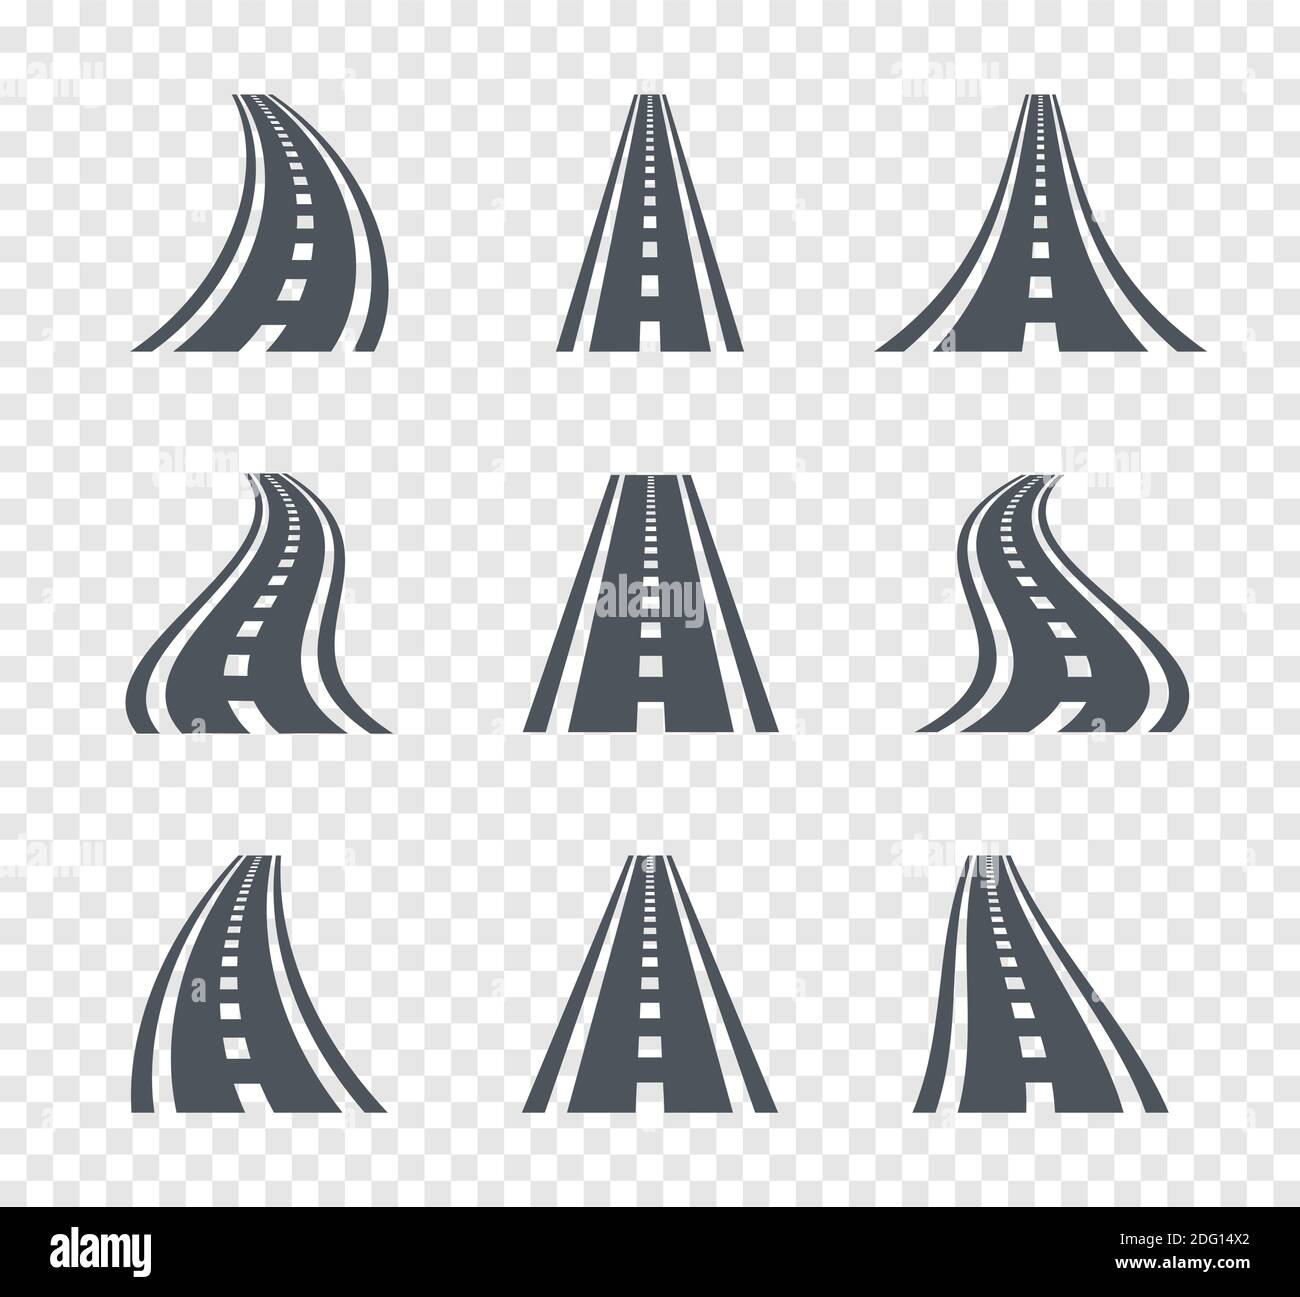 Curved road symbols. Highway and roadway sign illustration Stock Vector